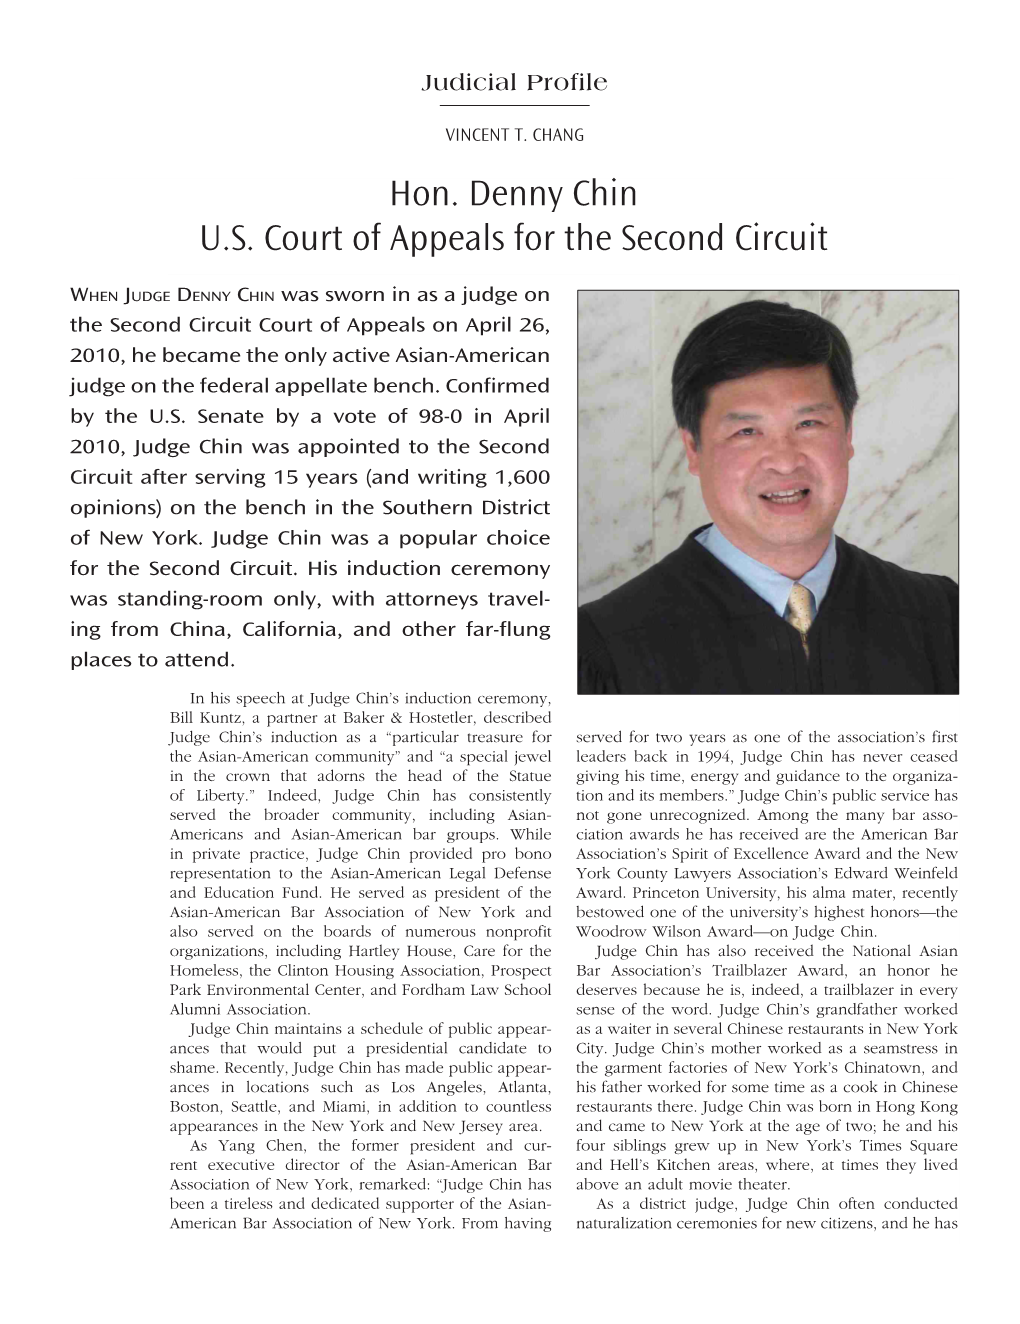 Hon. Denny Chin U.S. Court of Appeals for the Second Circuit